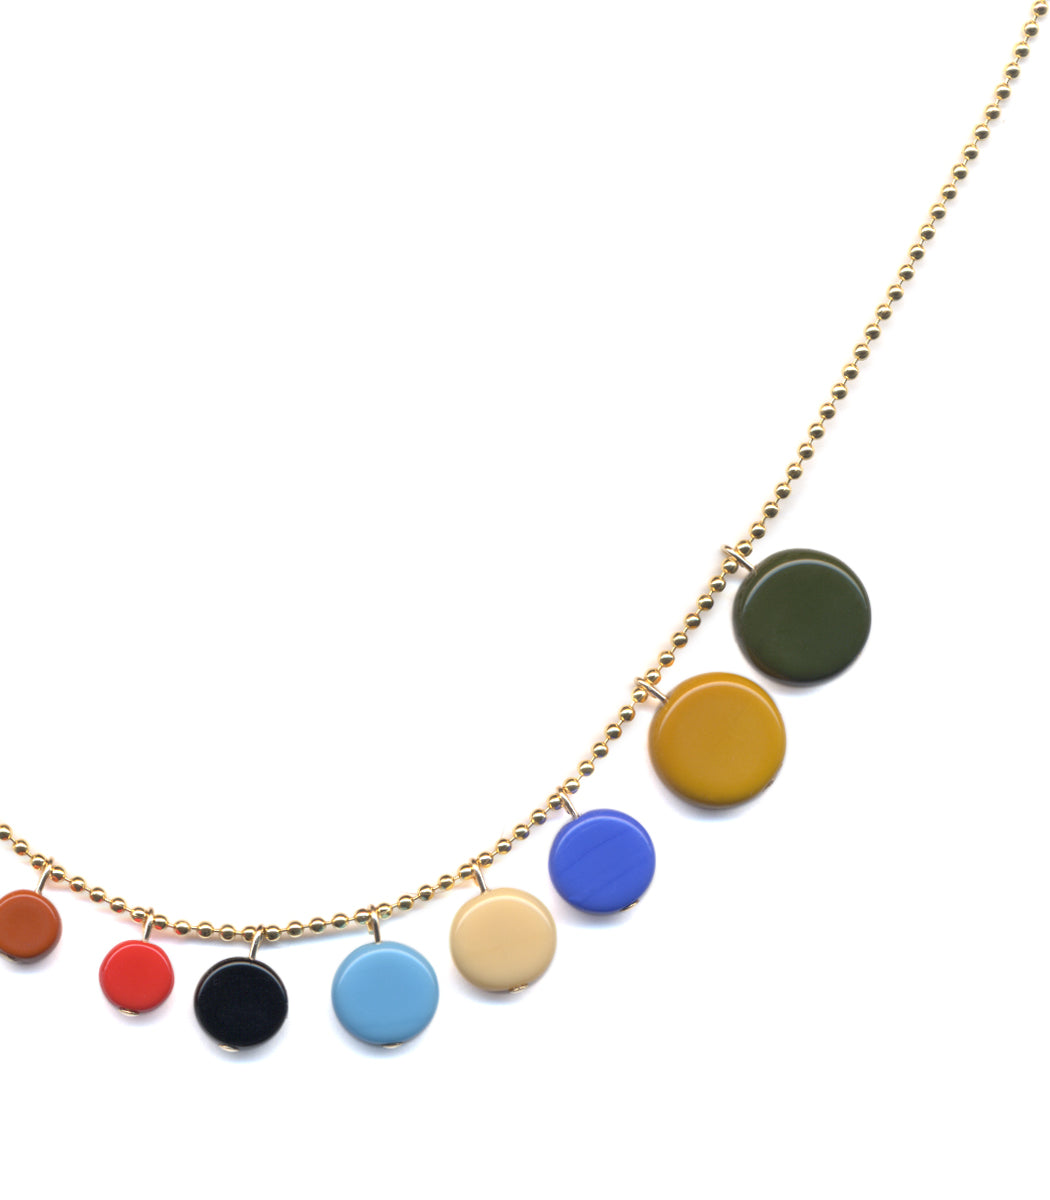 N2003 Louise Bourgeois Necklace – I. Ronni Kappos